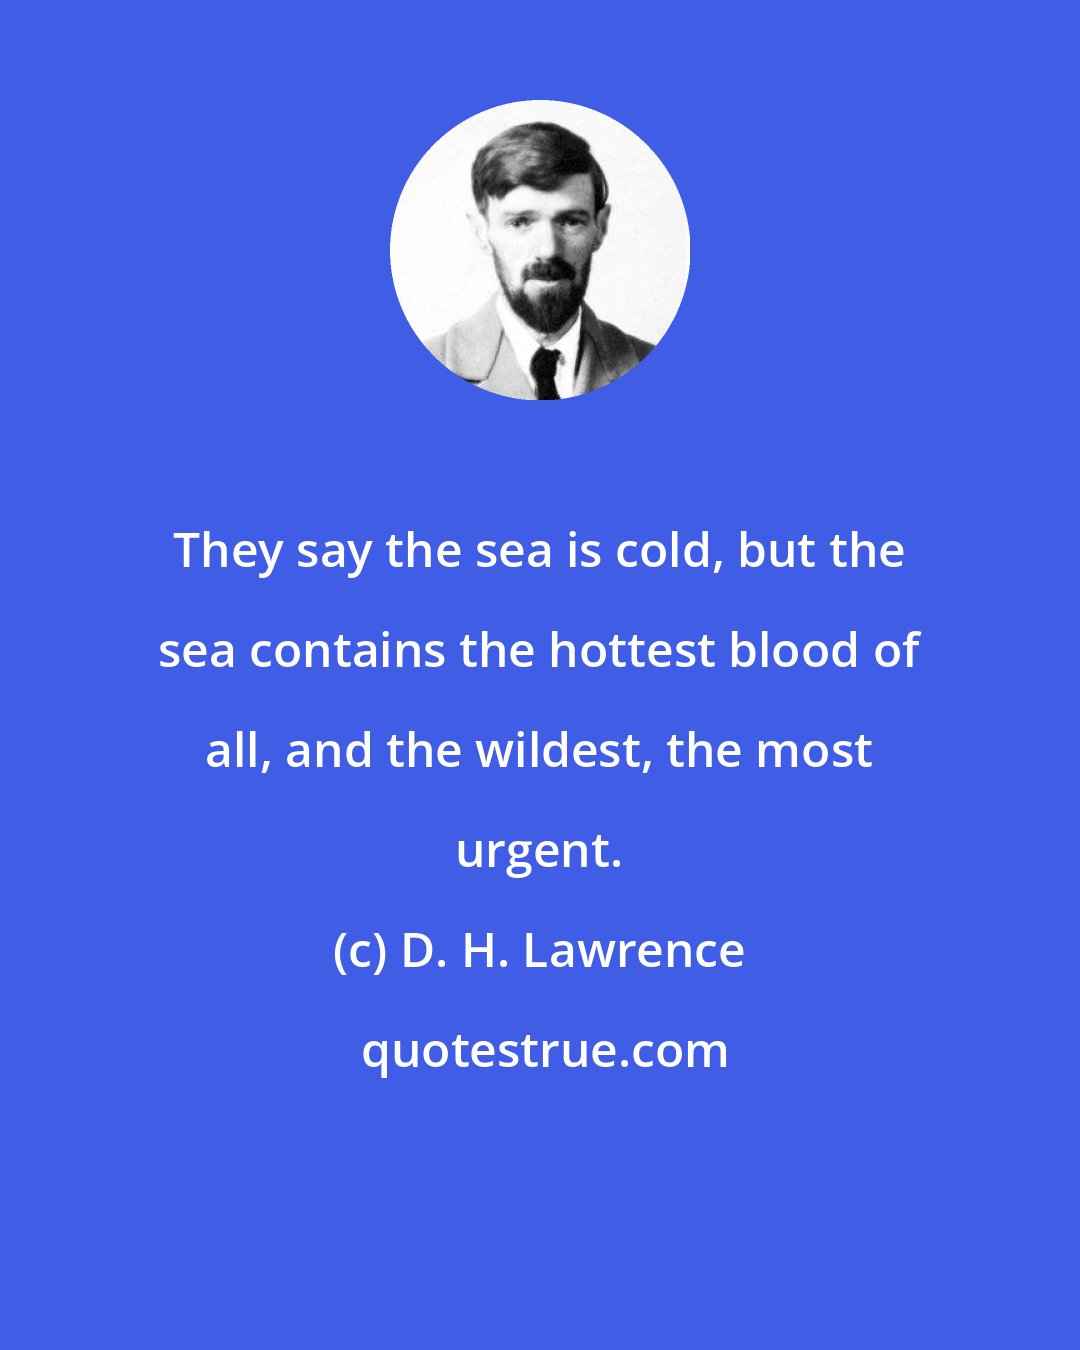 D. H. Lawrence: They say the sea is cold, but the sea contains the hottest blood of all, and the wildest, the most urgent.